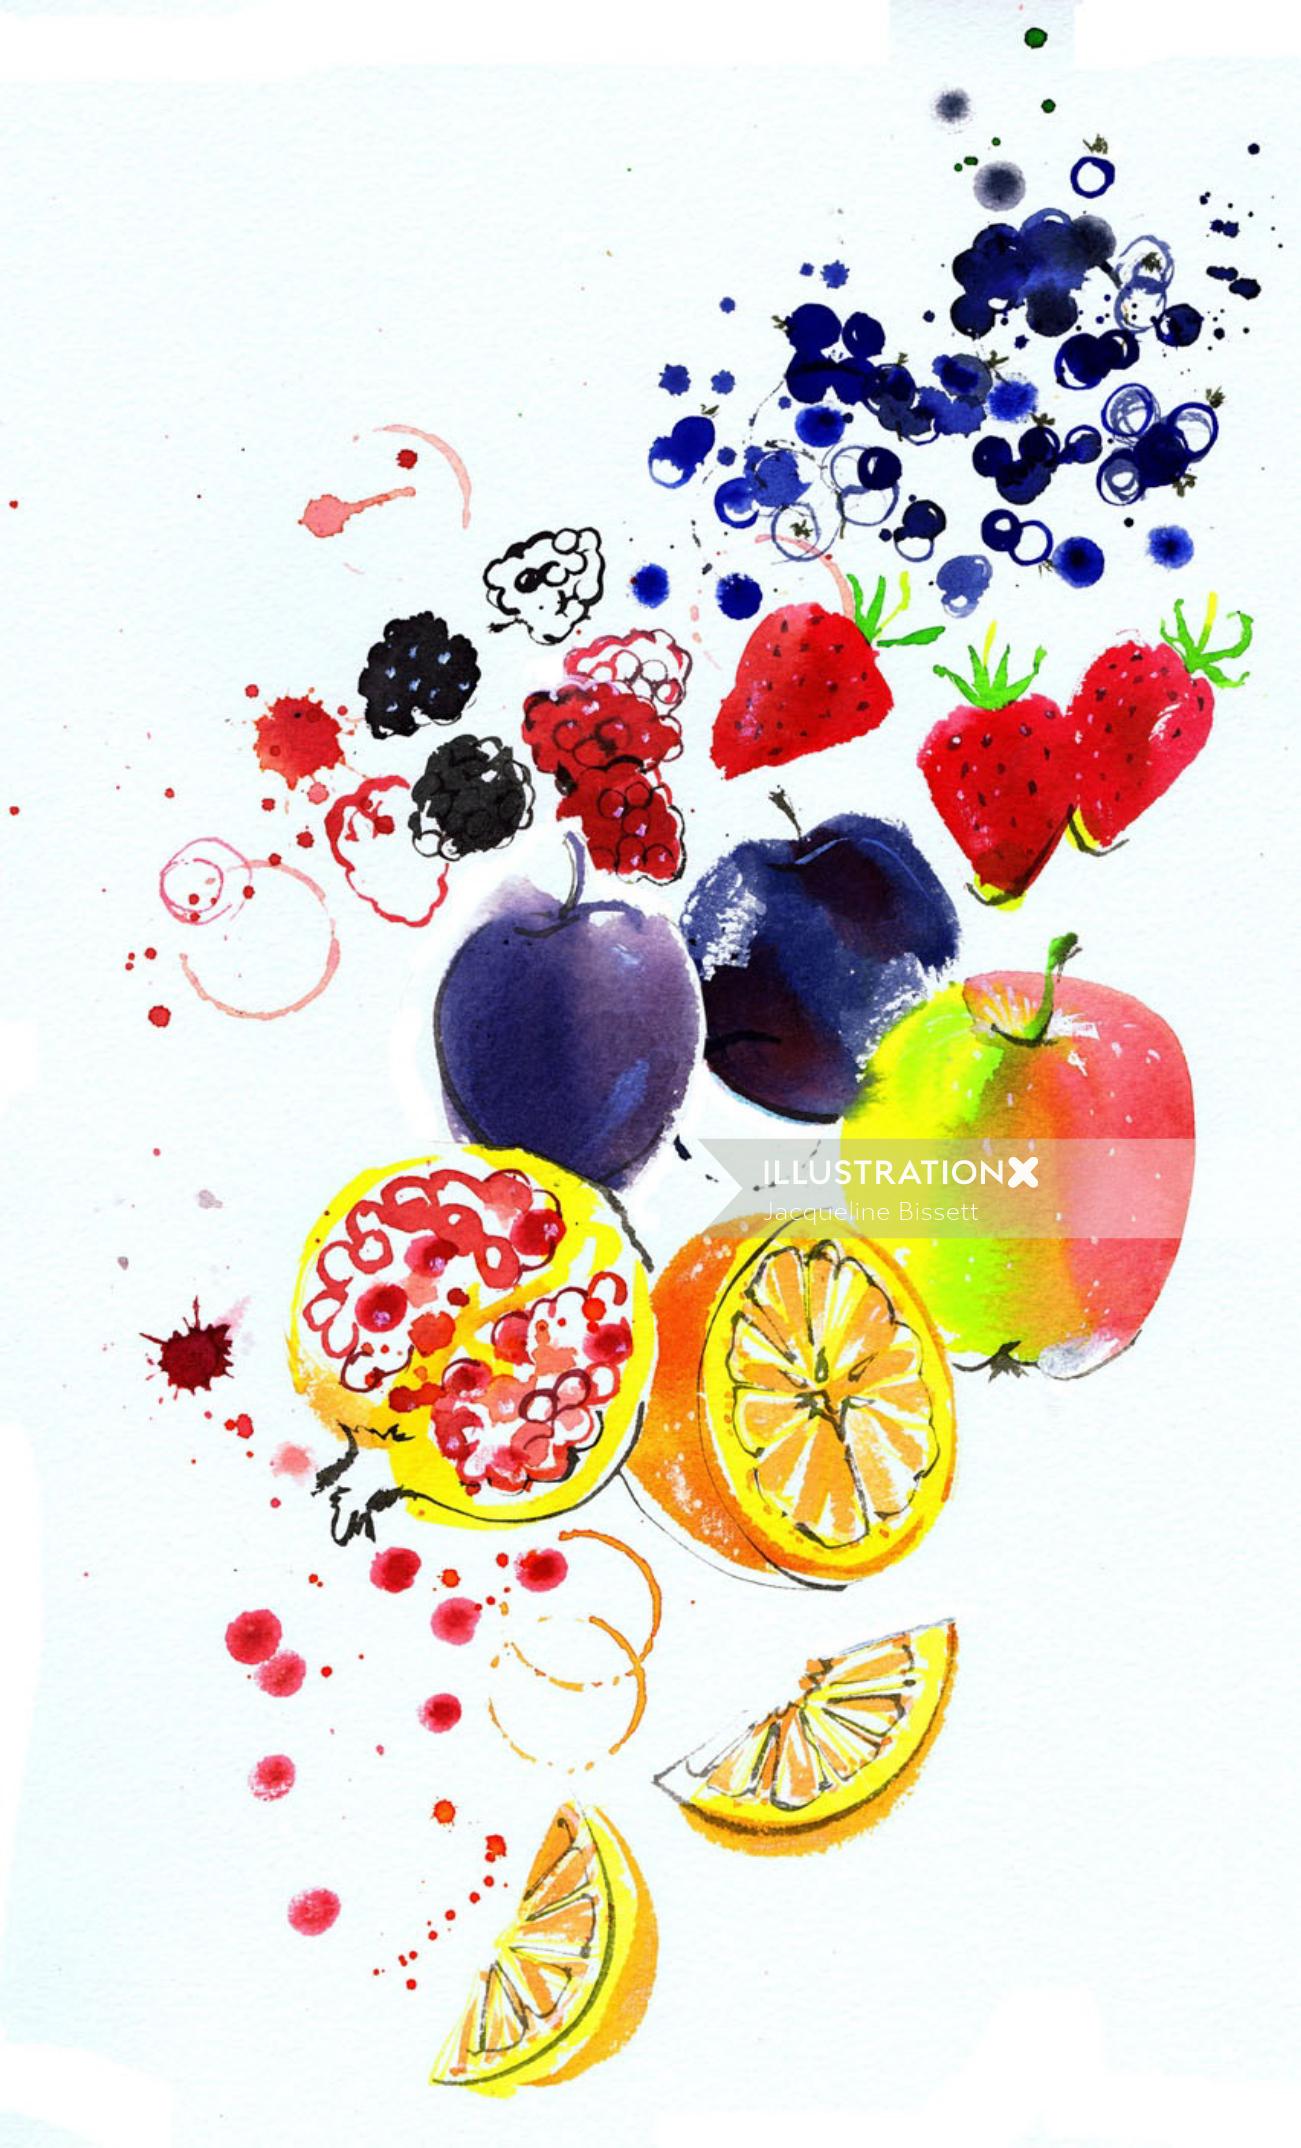 Fruits watercolour painting